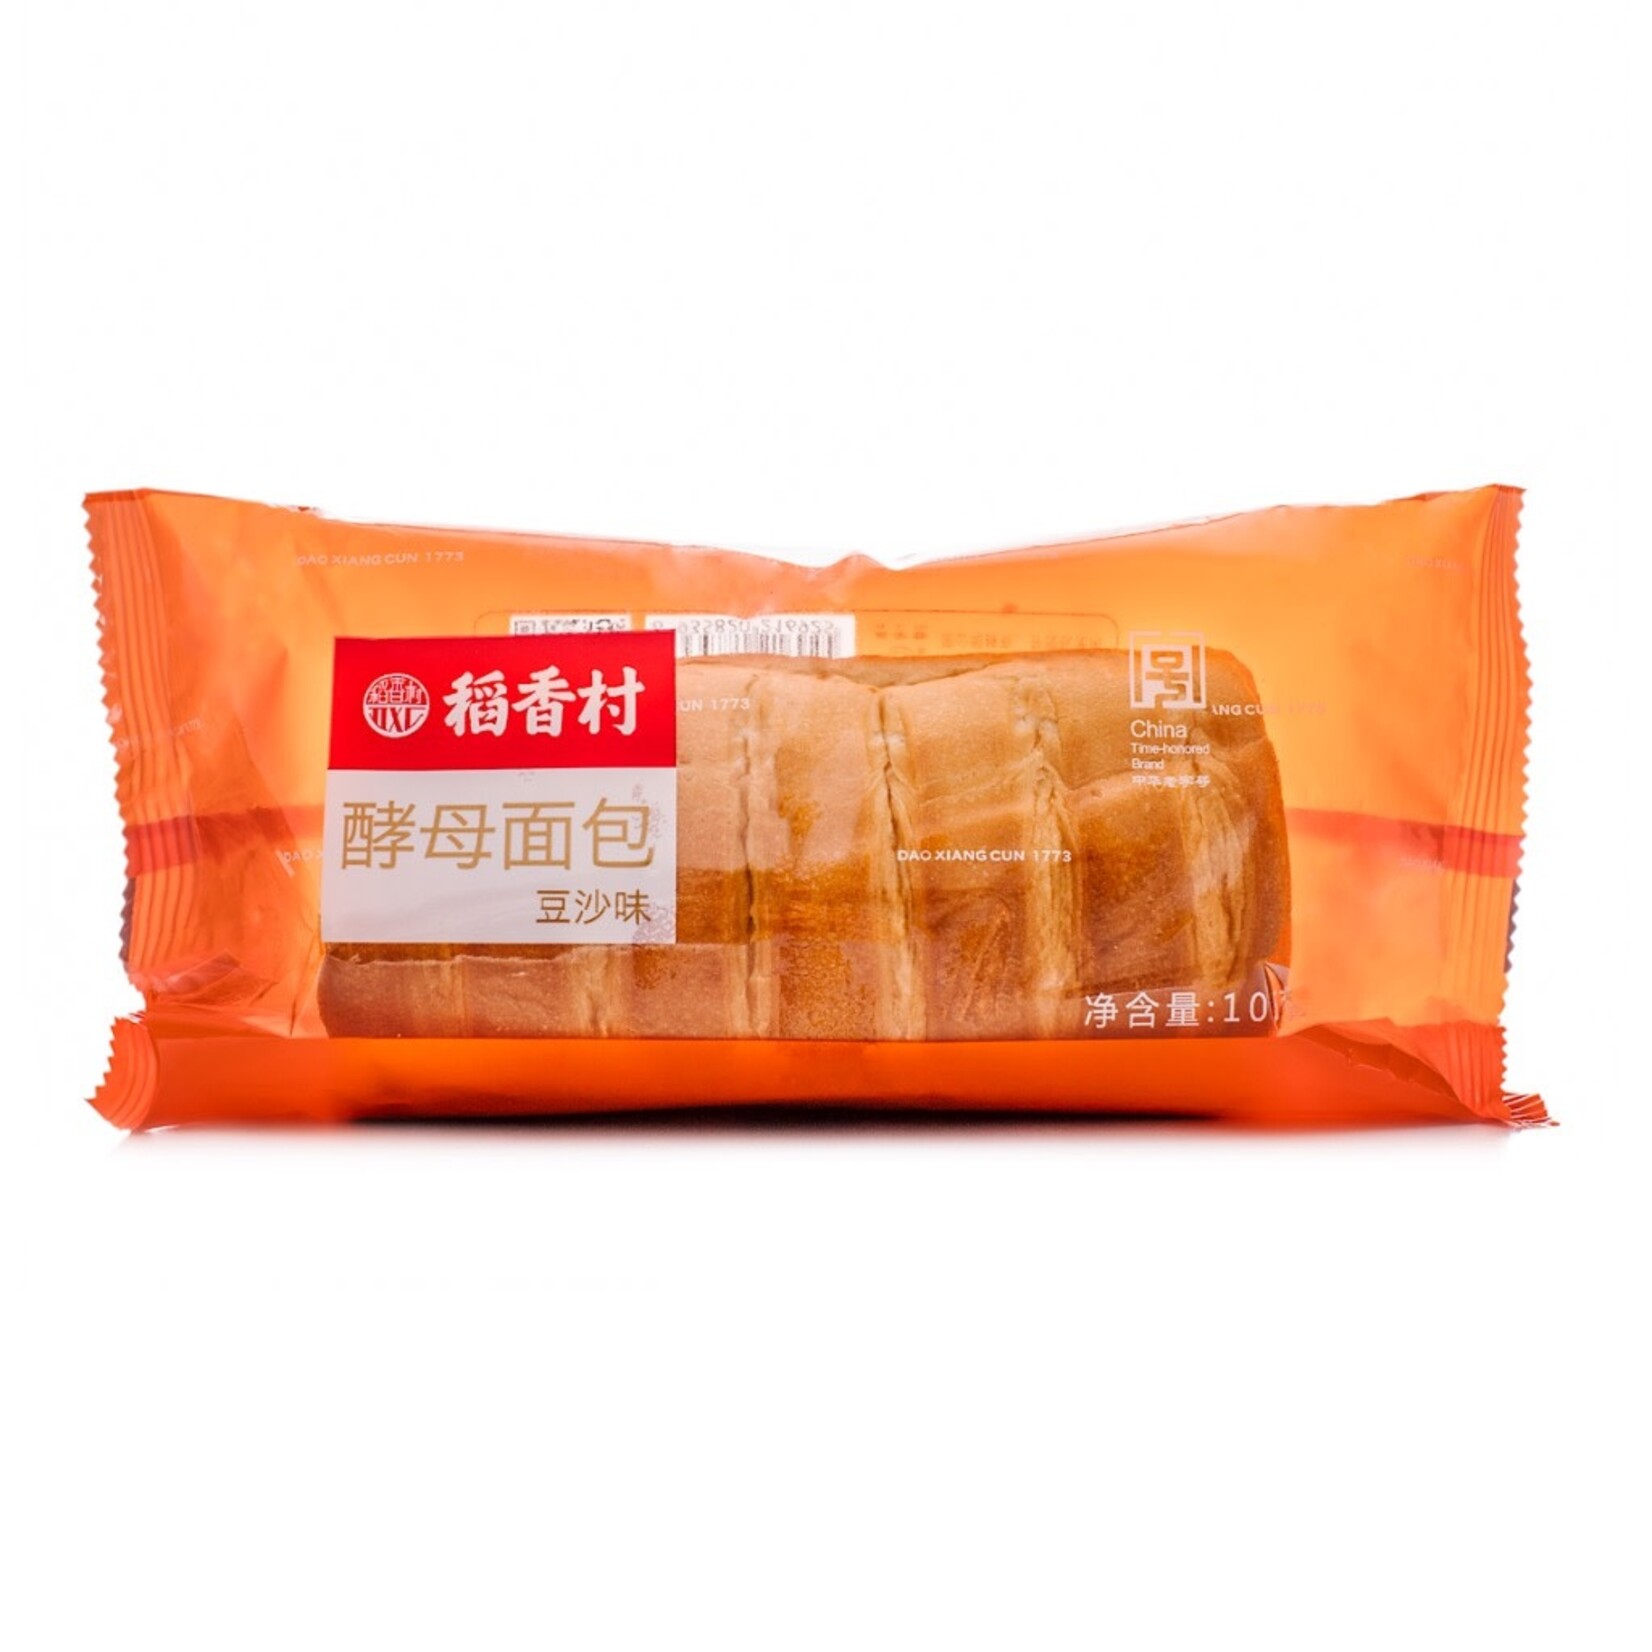 Dao Xiang Cun Bread with Red Bean Paste